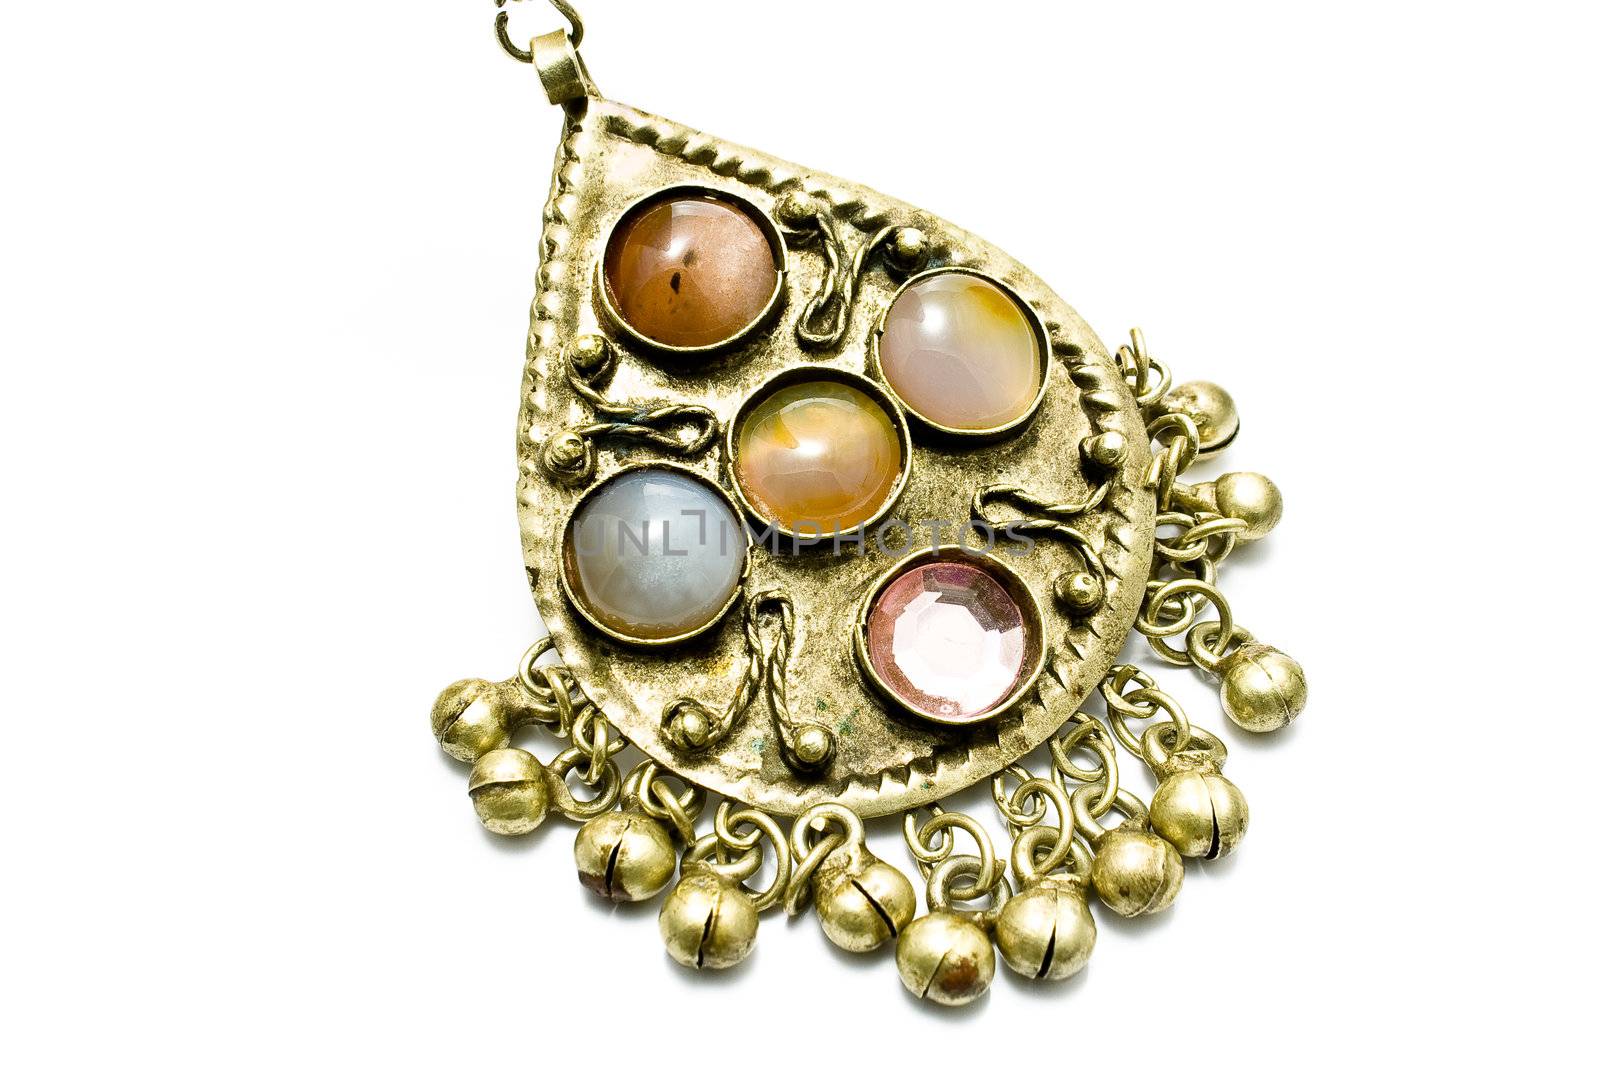 Antique necklace pendant with gems by gavran333